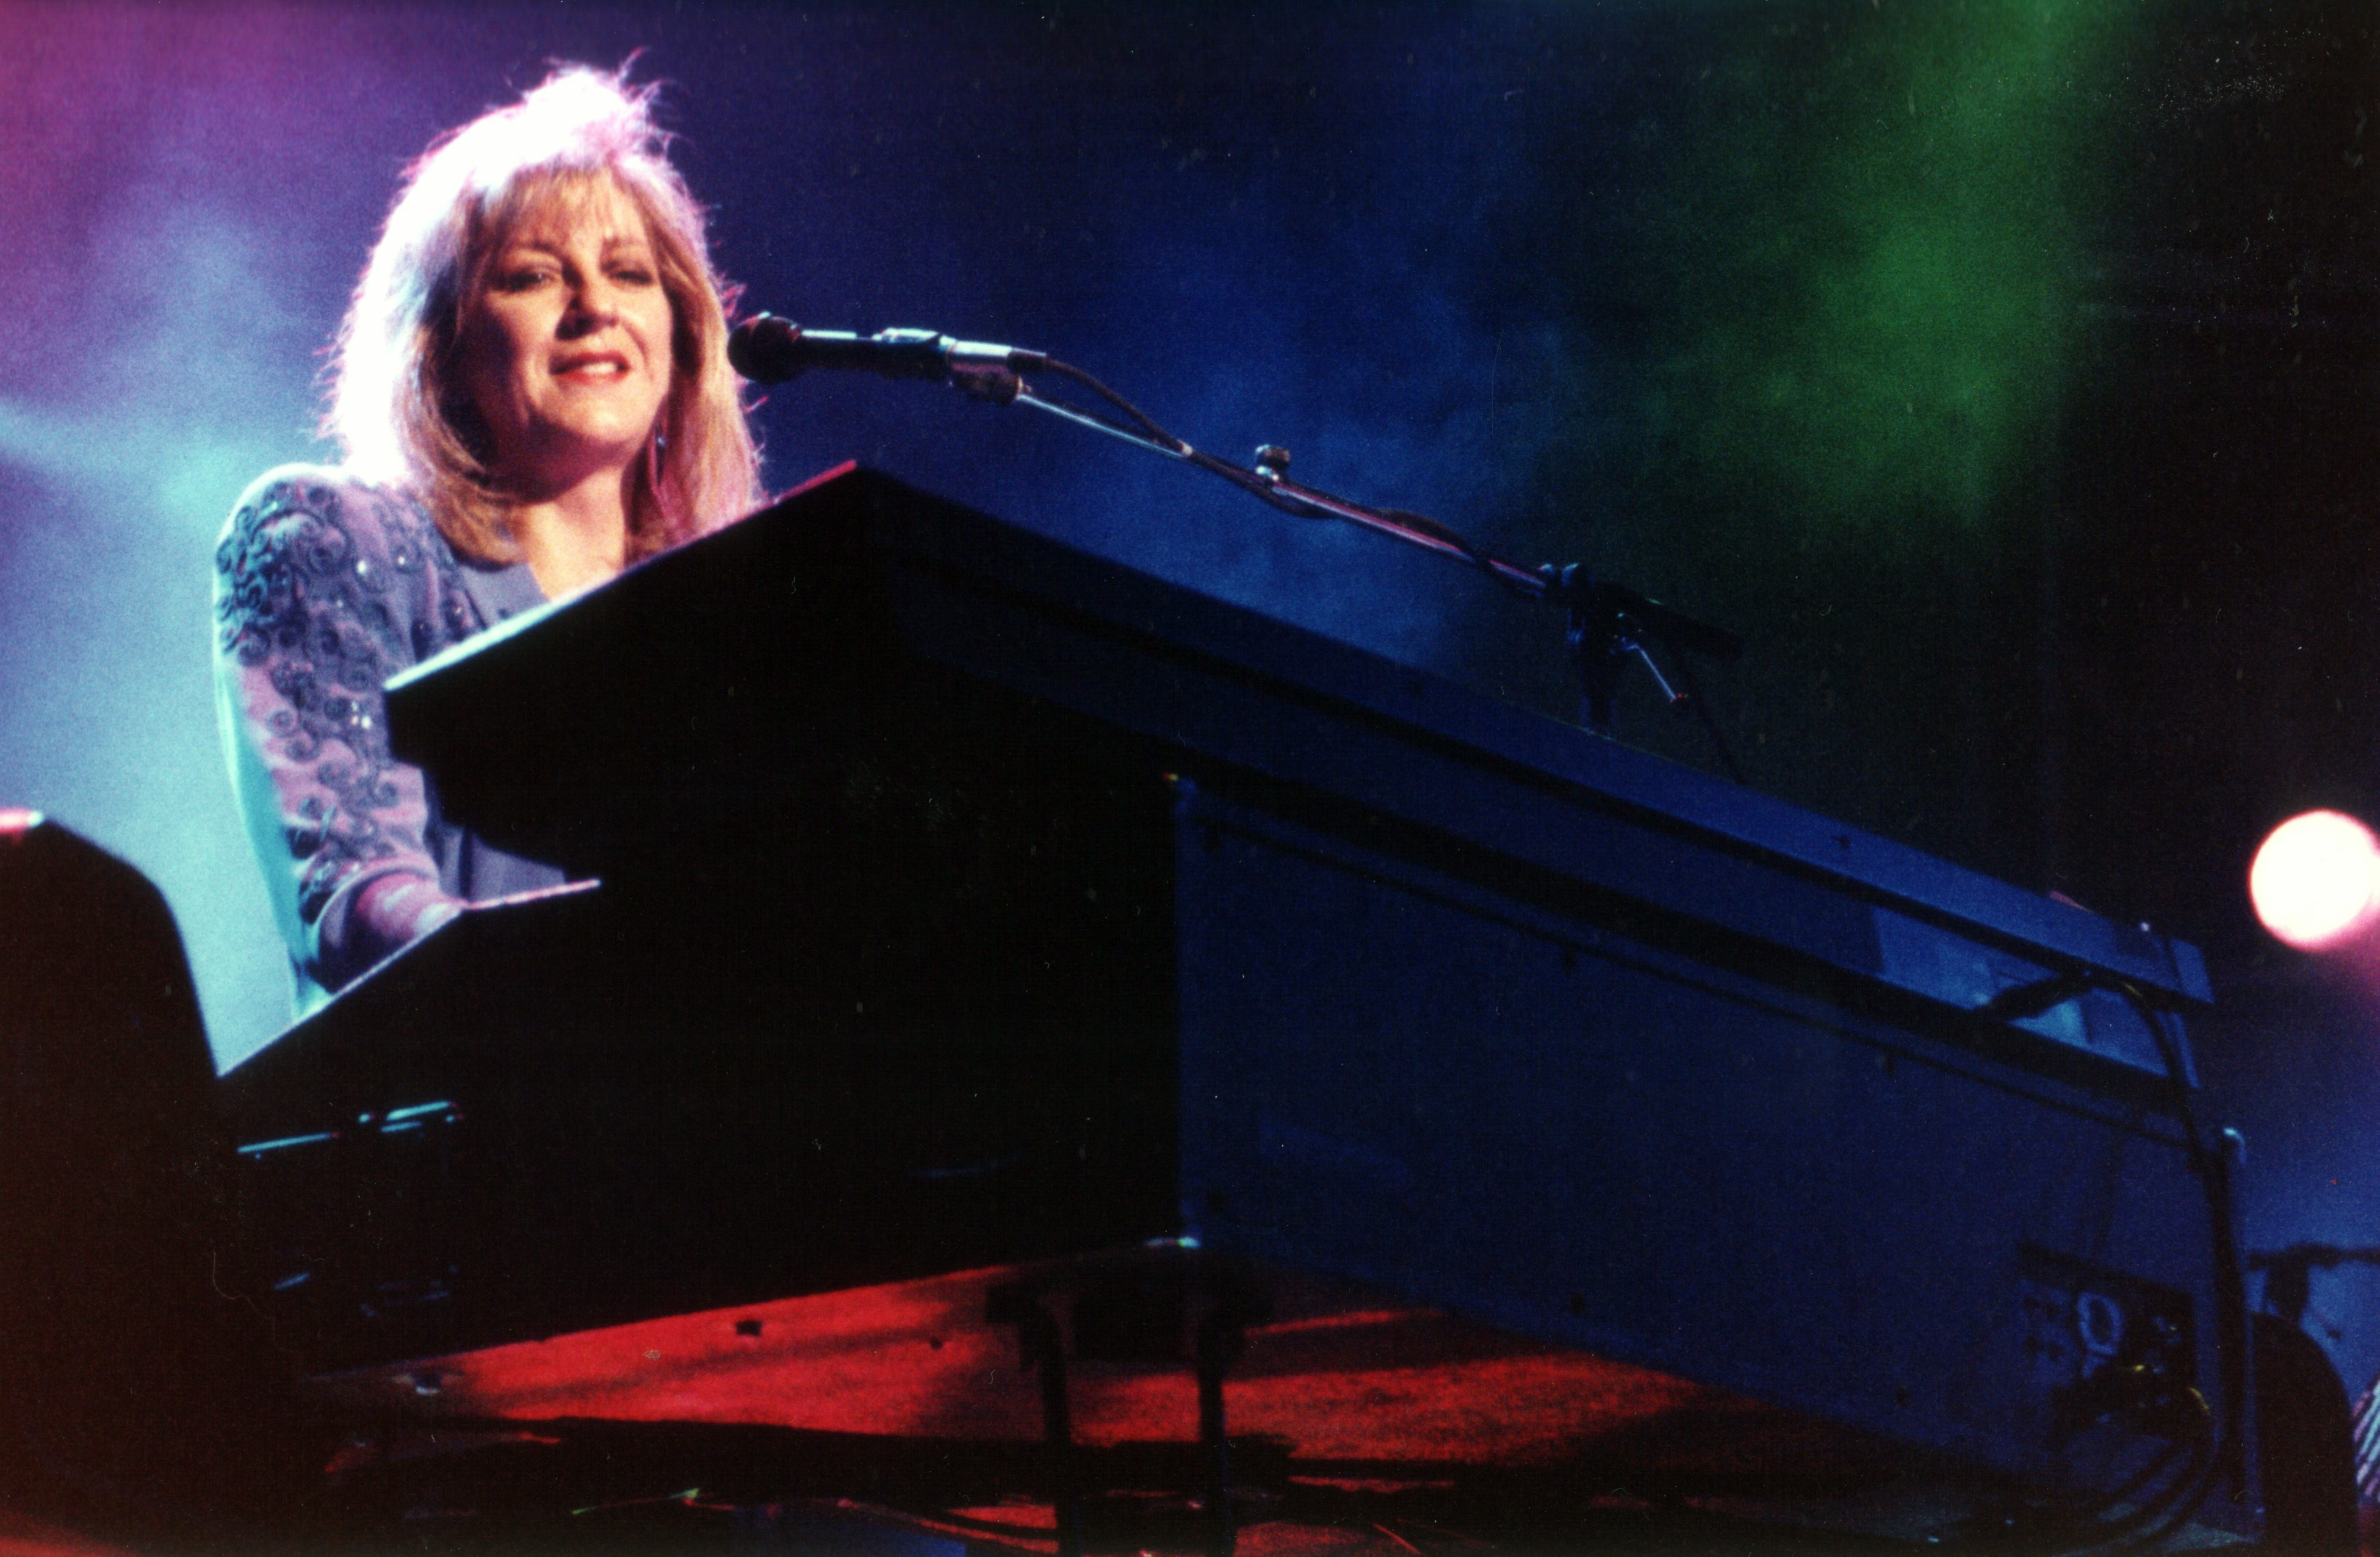 Fleetwood Mac (Christine McVie) performs at the Met Center in Bloomington, Minnesota on June 30, 1990. (Photo by Jim Steinfeldt/Michael Ochs Archives/Getty Images)